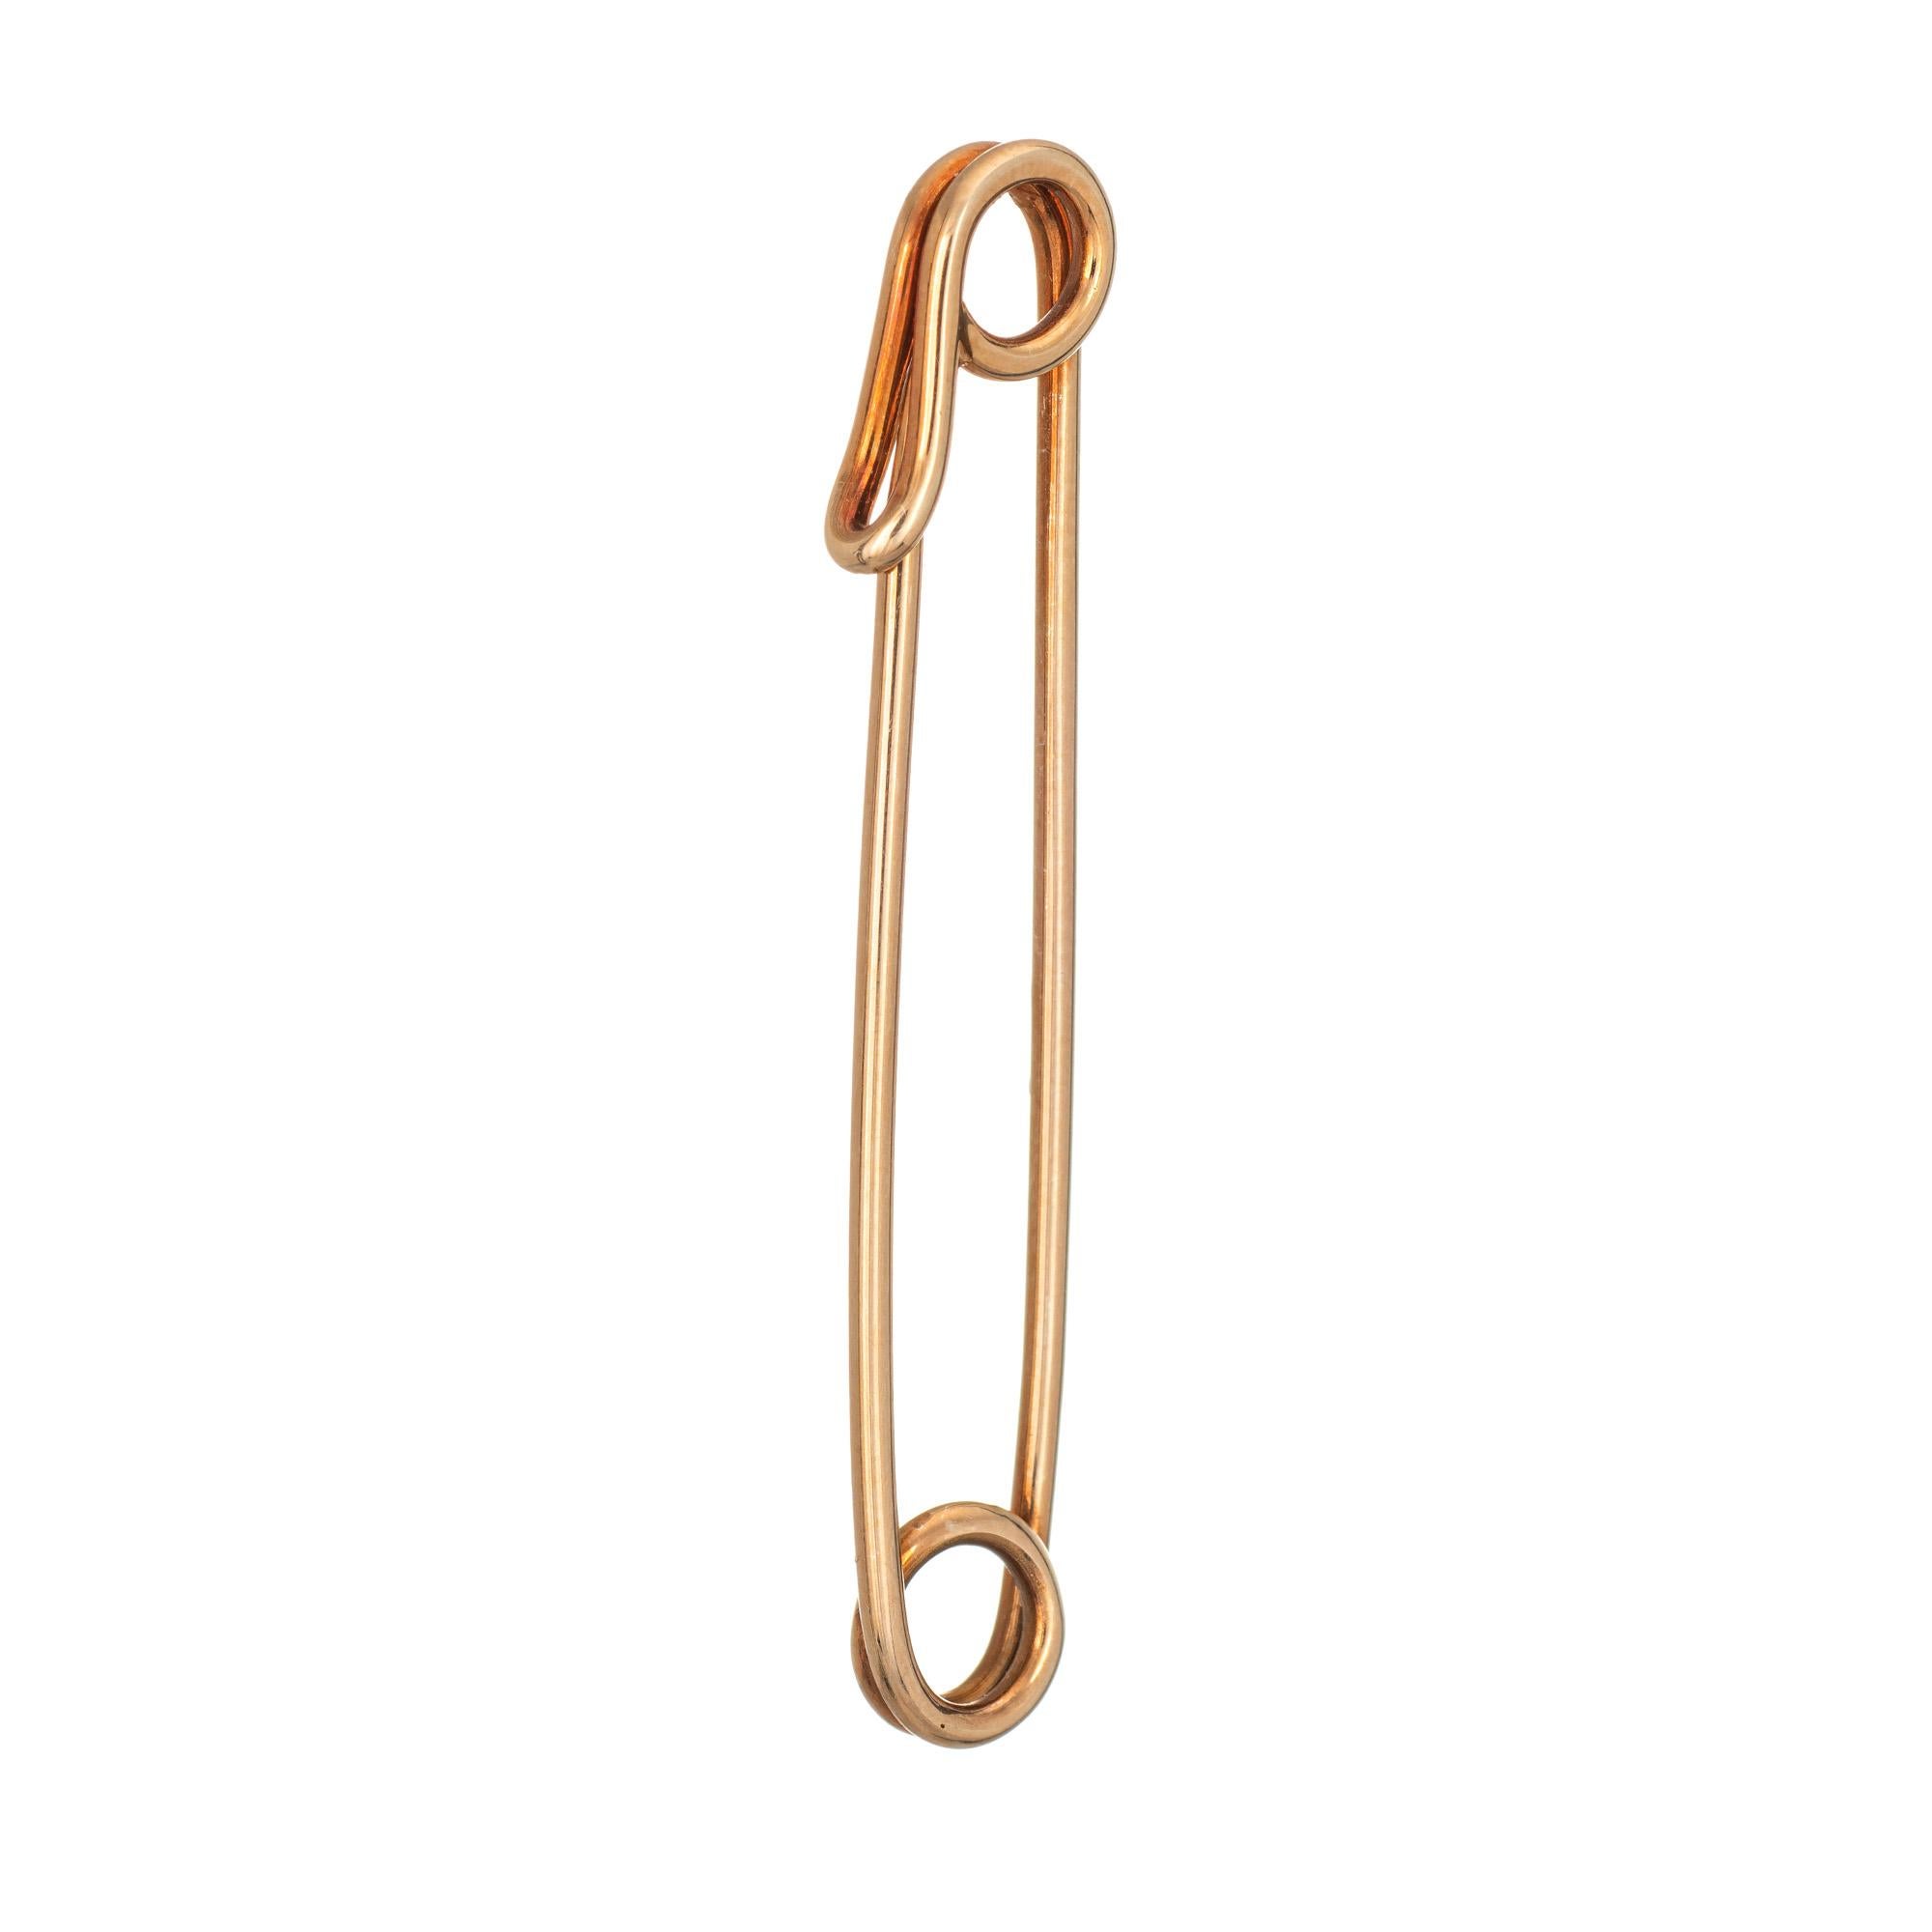 Stylish and finely detailed vintage Tiffany & Co baby pin crafted in 14k yellow gold.  

The diaper pin opens and closes securely. Great for wear on it's own or used as a connector piece on a chain.  

The pin is in very good condition. We have not